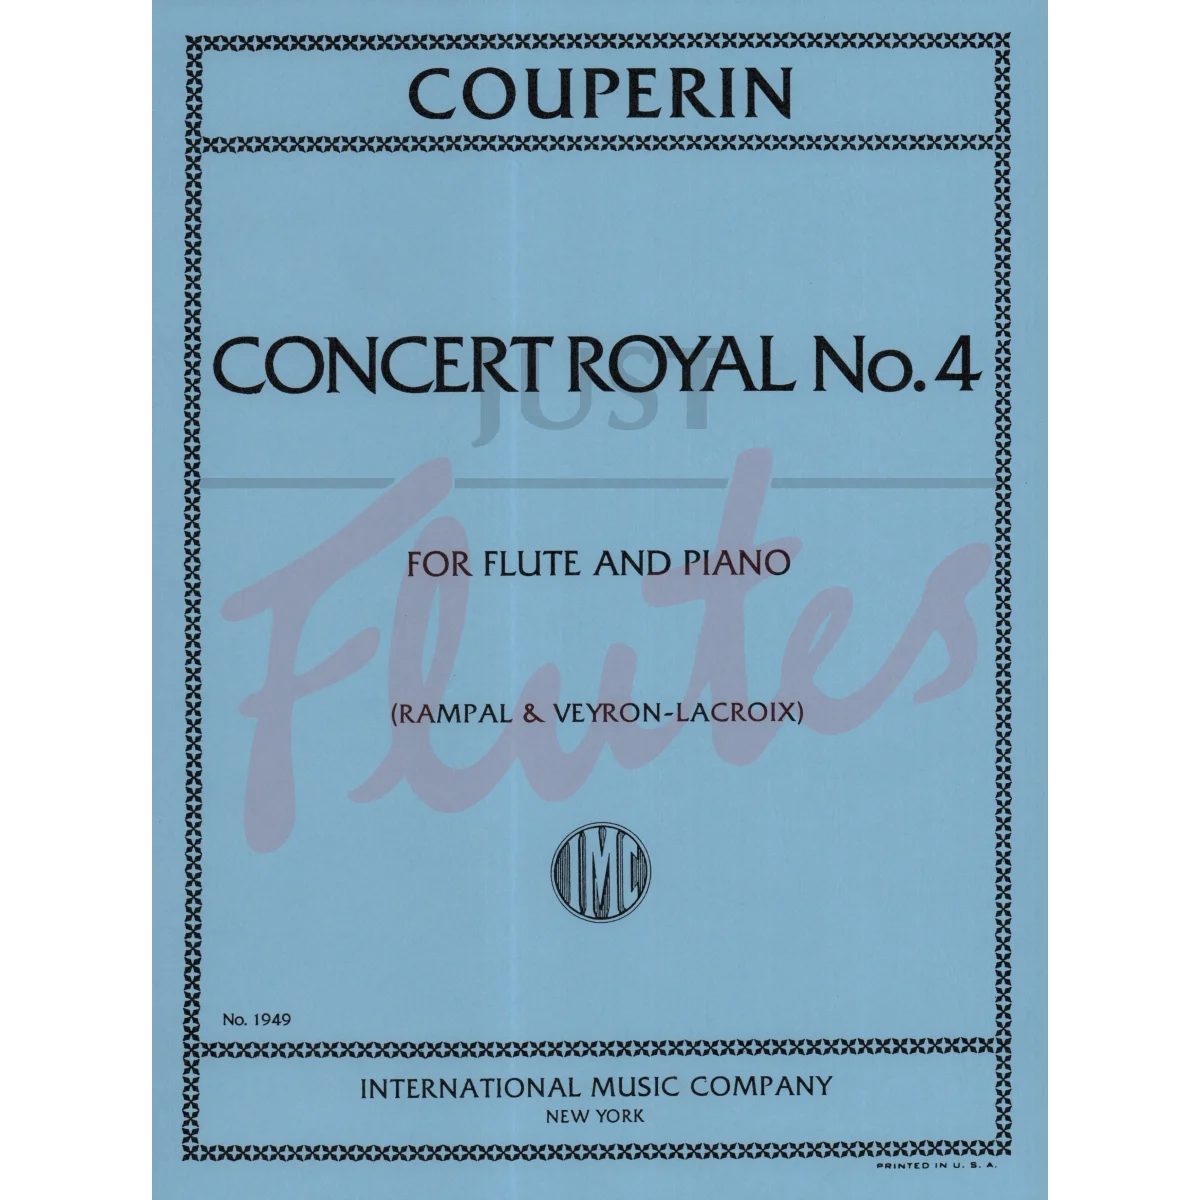 Concert Royale No. 4 for Flute and Piano